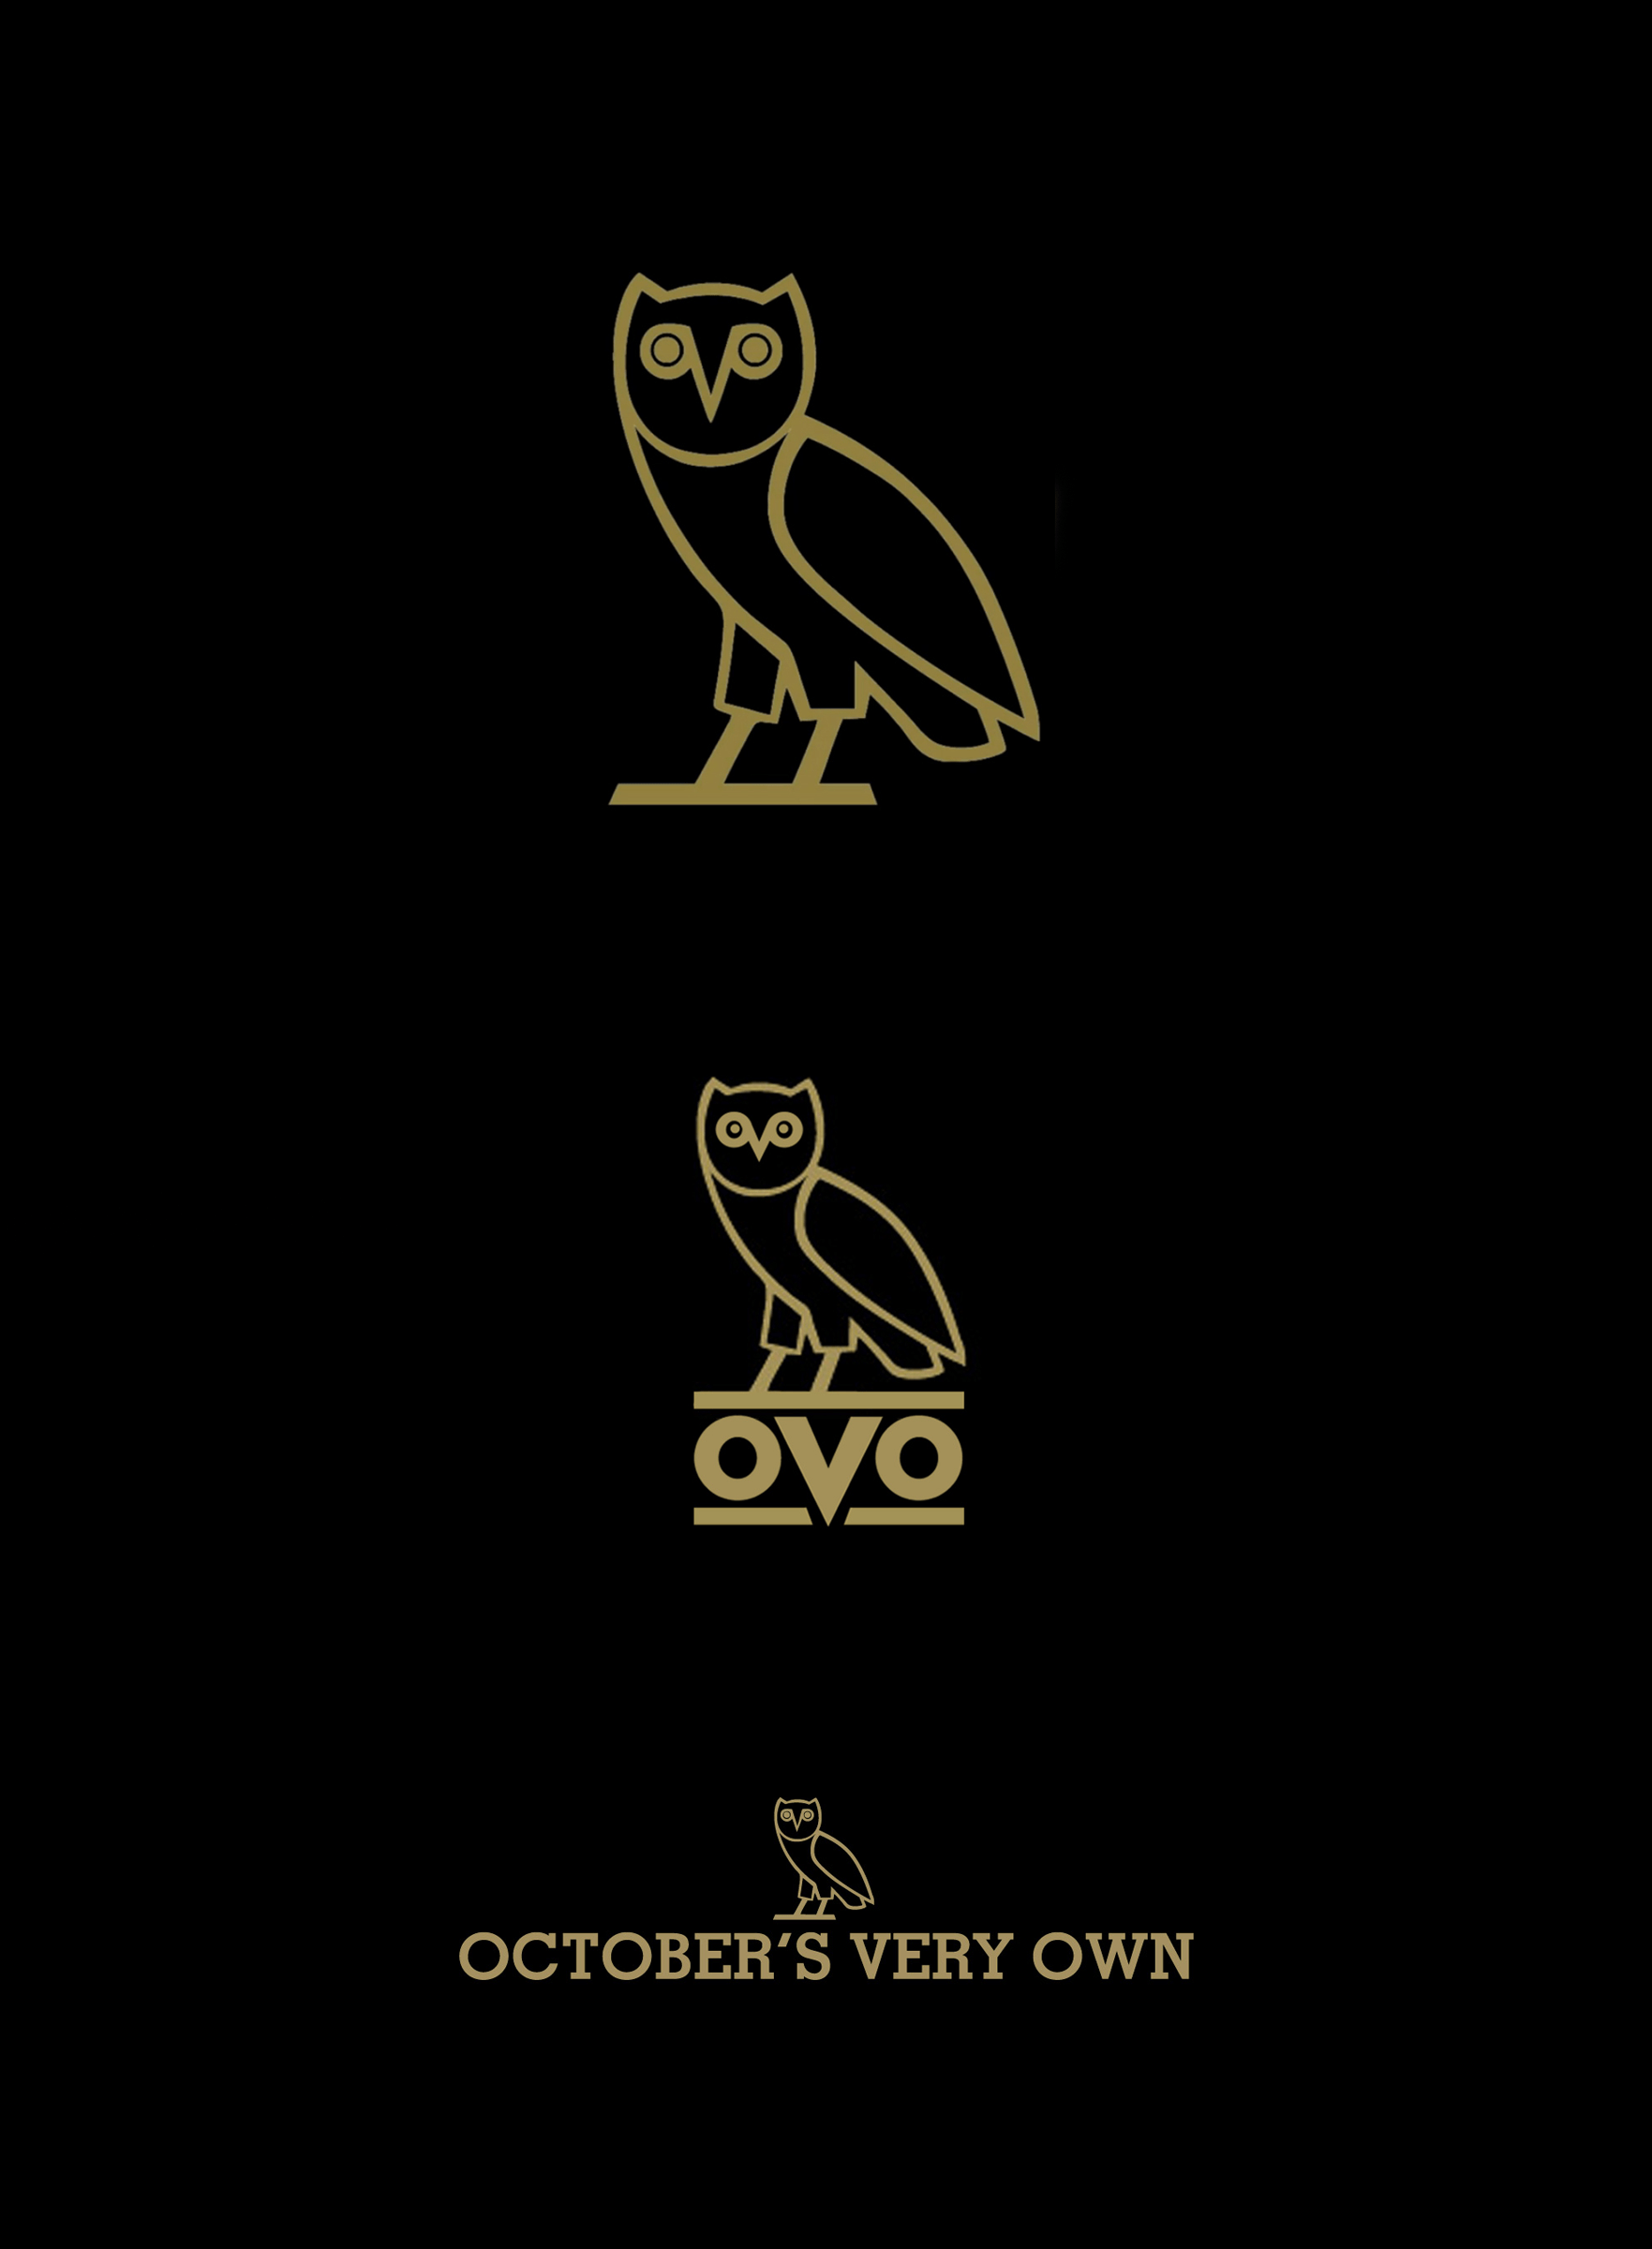 Drake Ovoxo Logo - OVO logo and wordmark for Drake's made in Canada clothing line ...